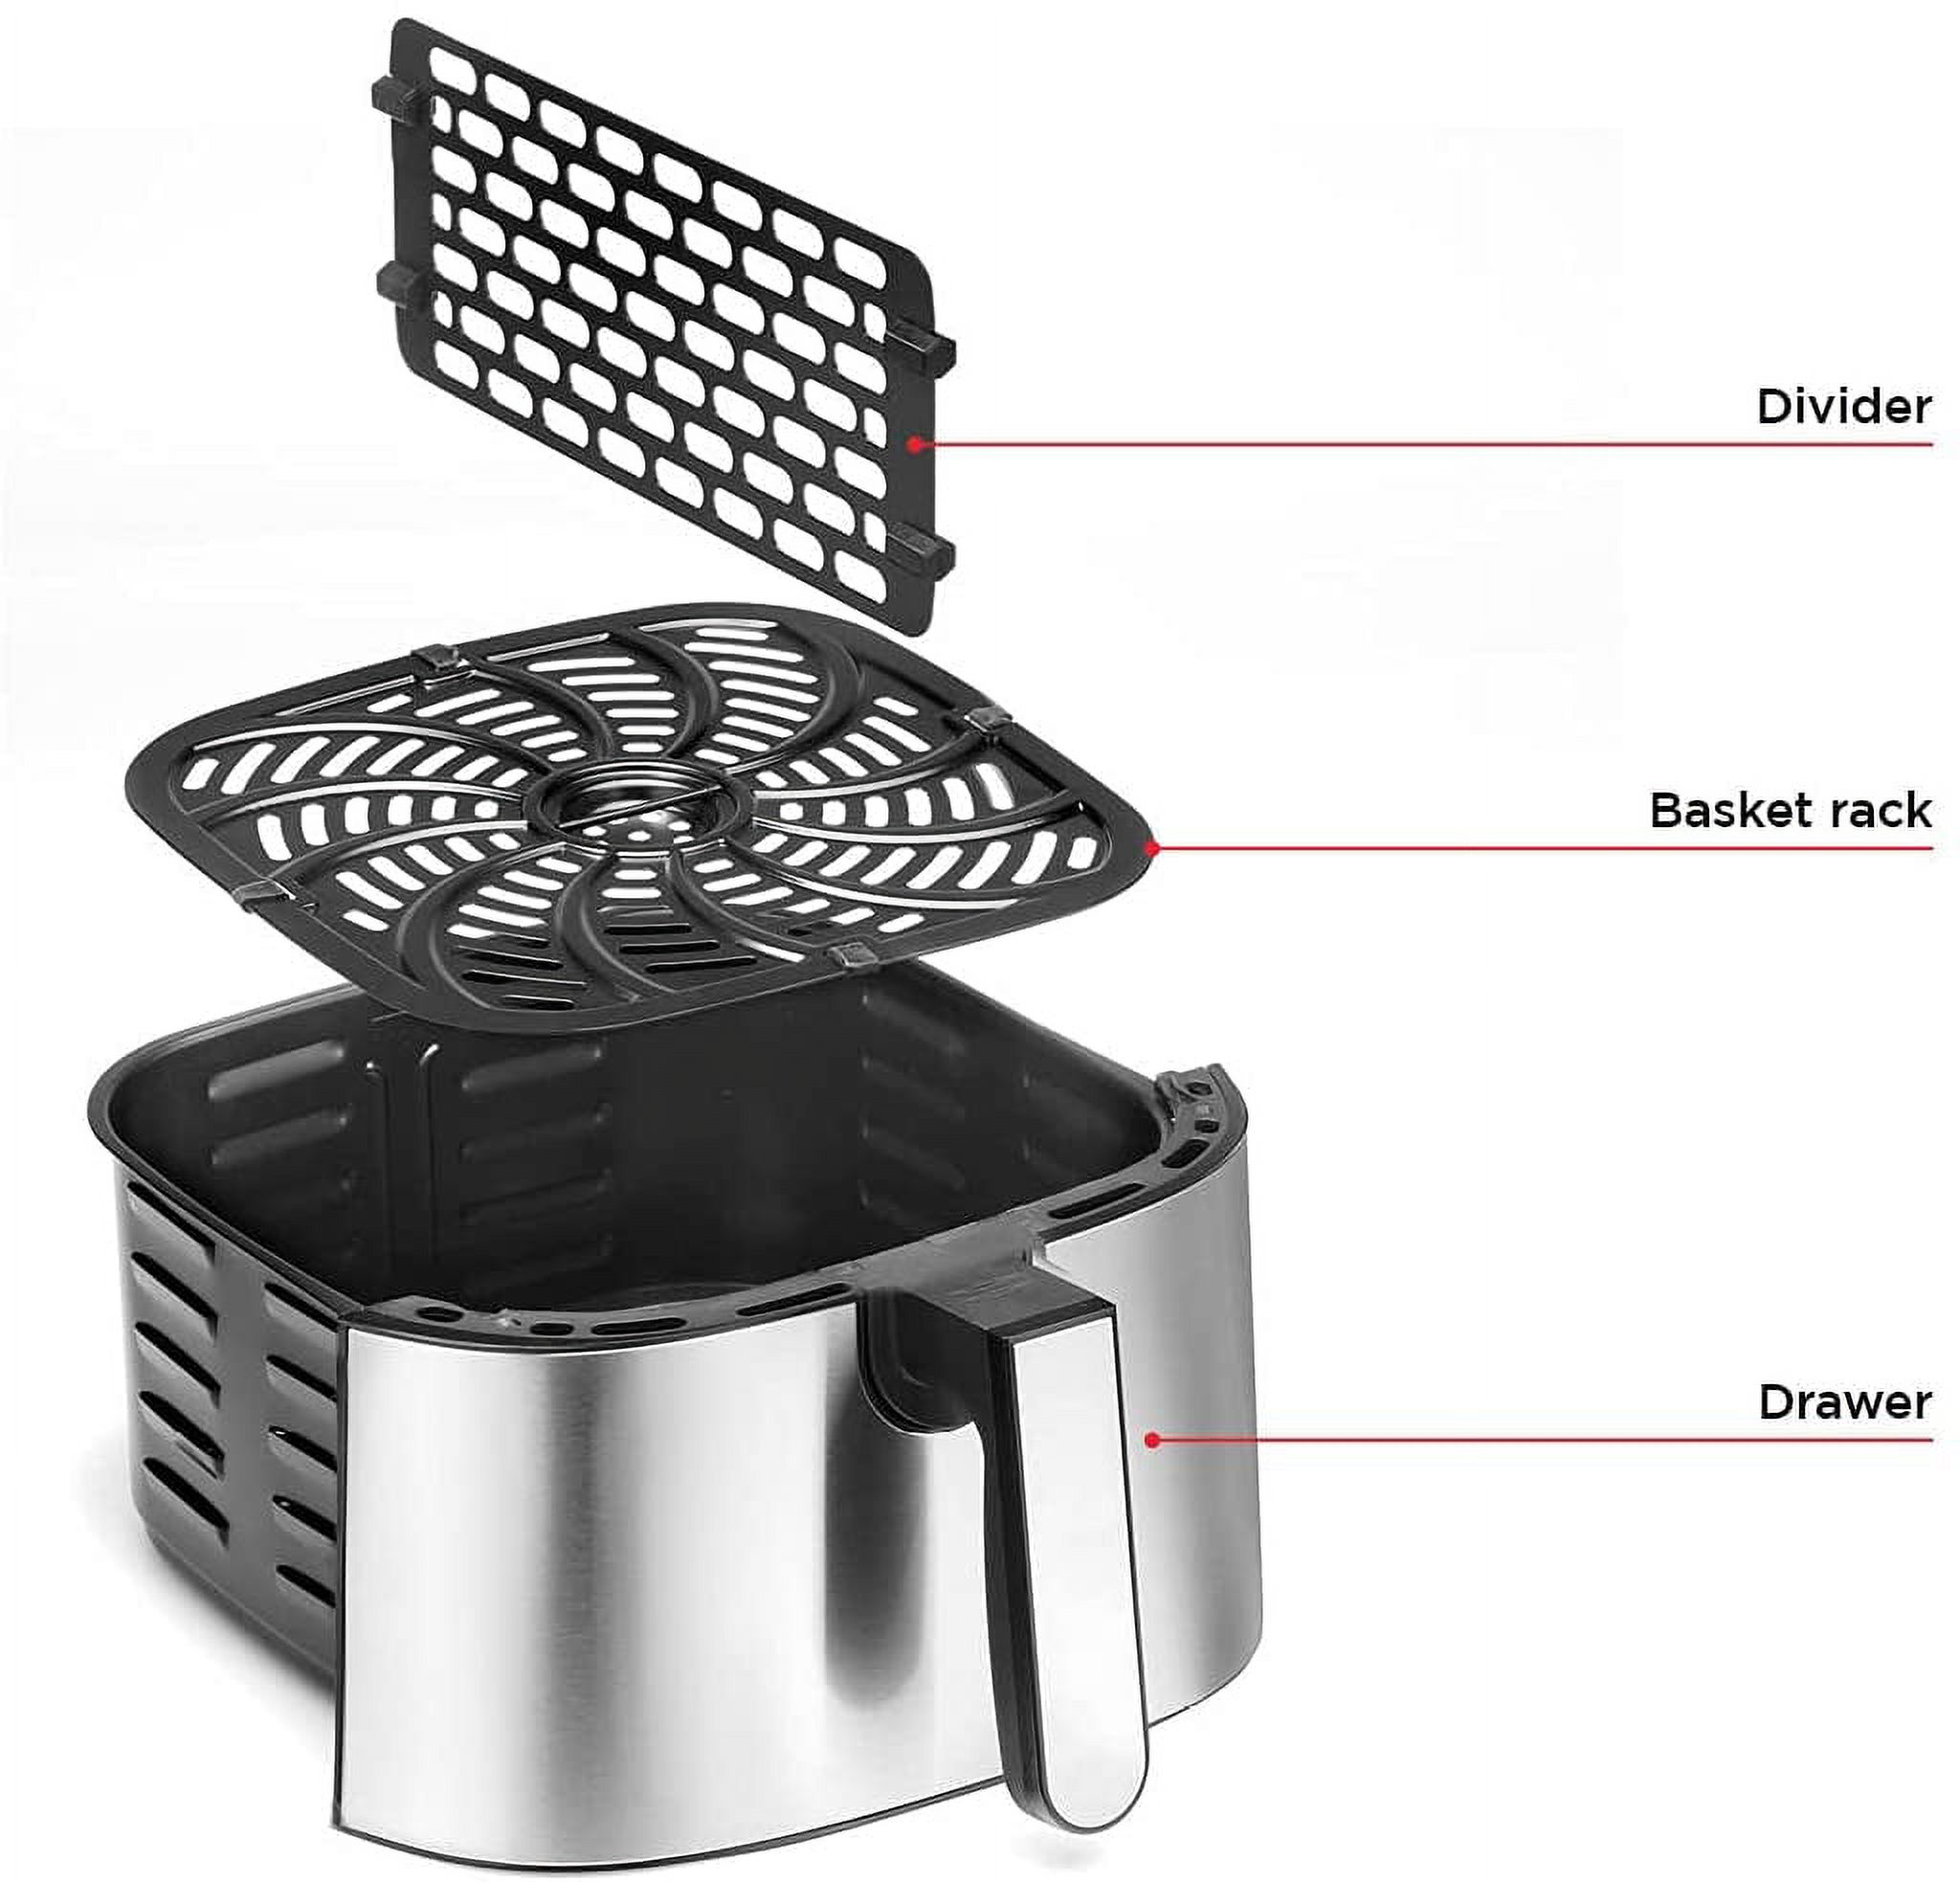 Chefman Turbo Fry Stainless Steel Air Fryer with Basket Divider, 8 Quart - image 5 of 9